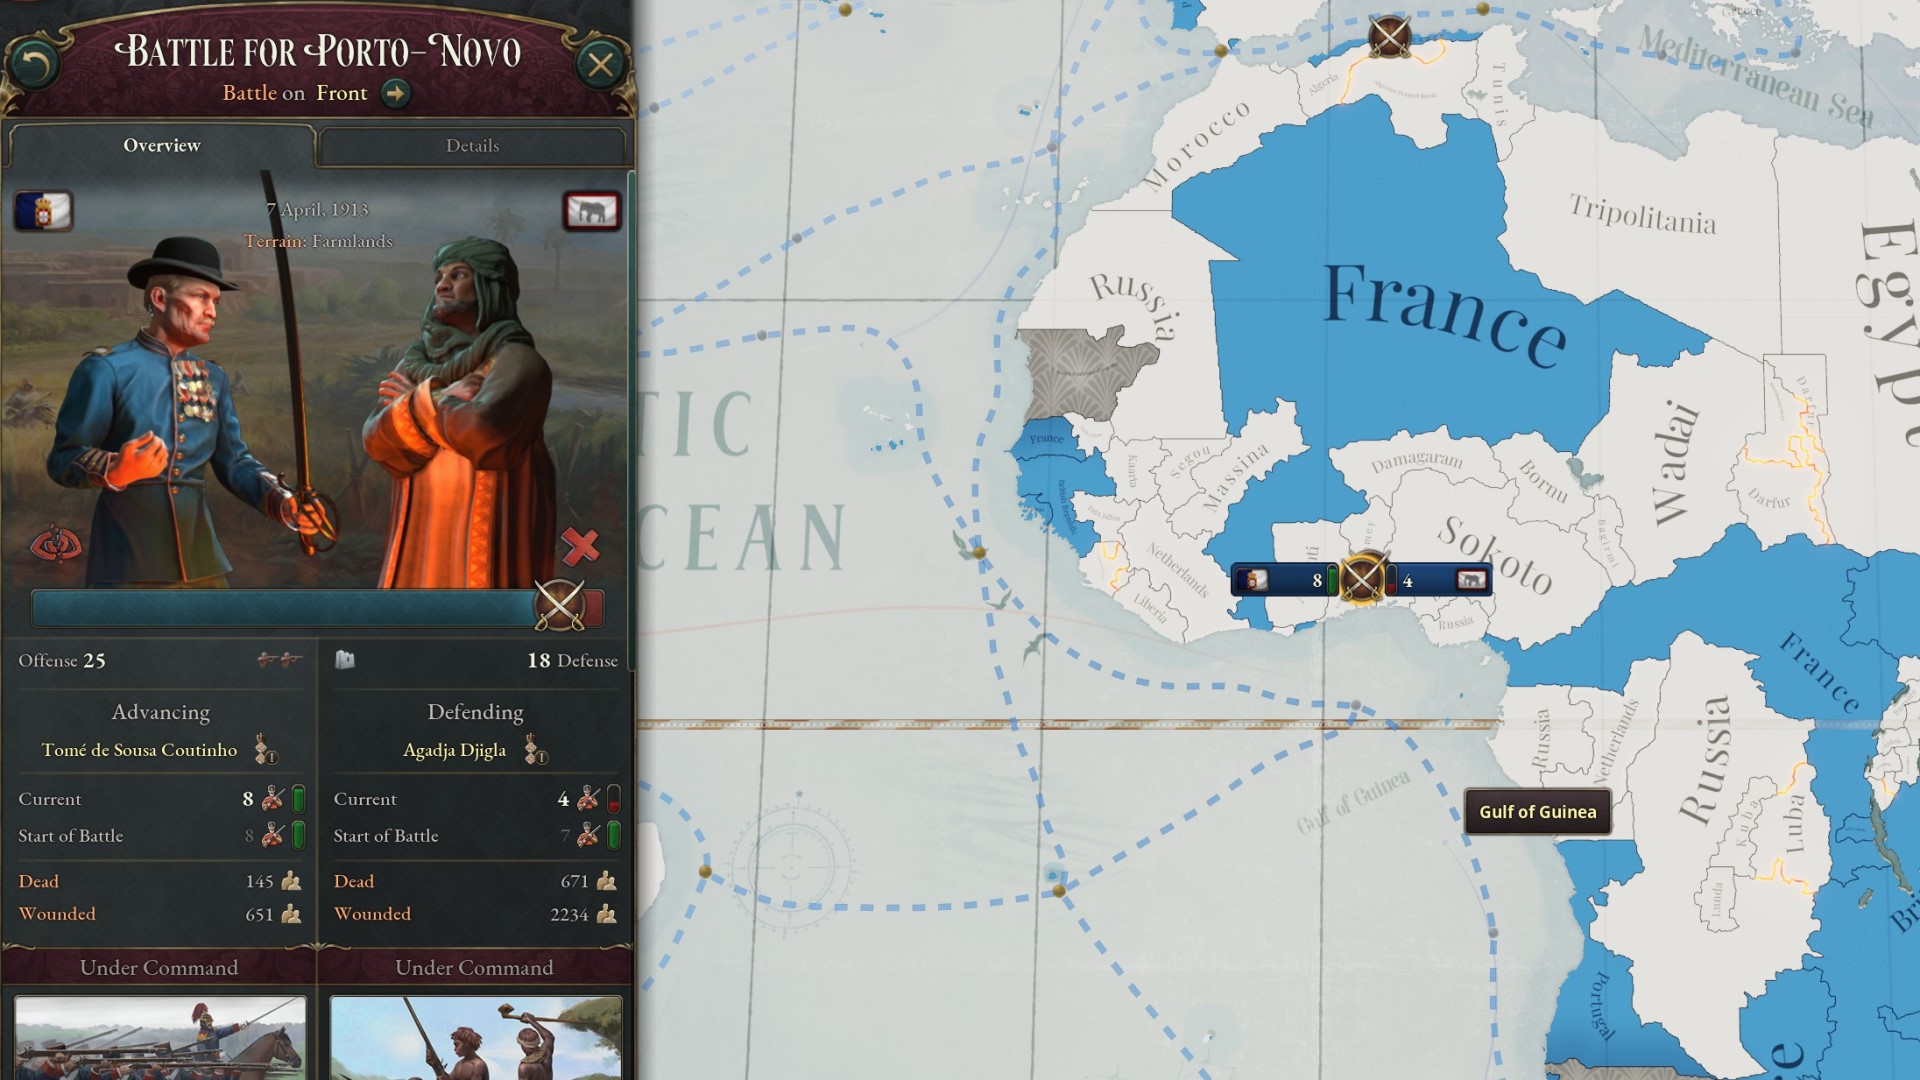 Victoria 3 review: An info panel provides the details on a battle taking place in Africa between a colonial officer and a native commander